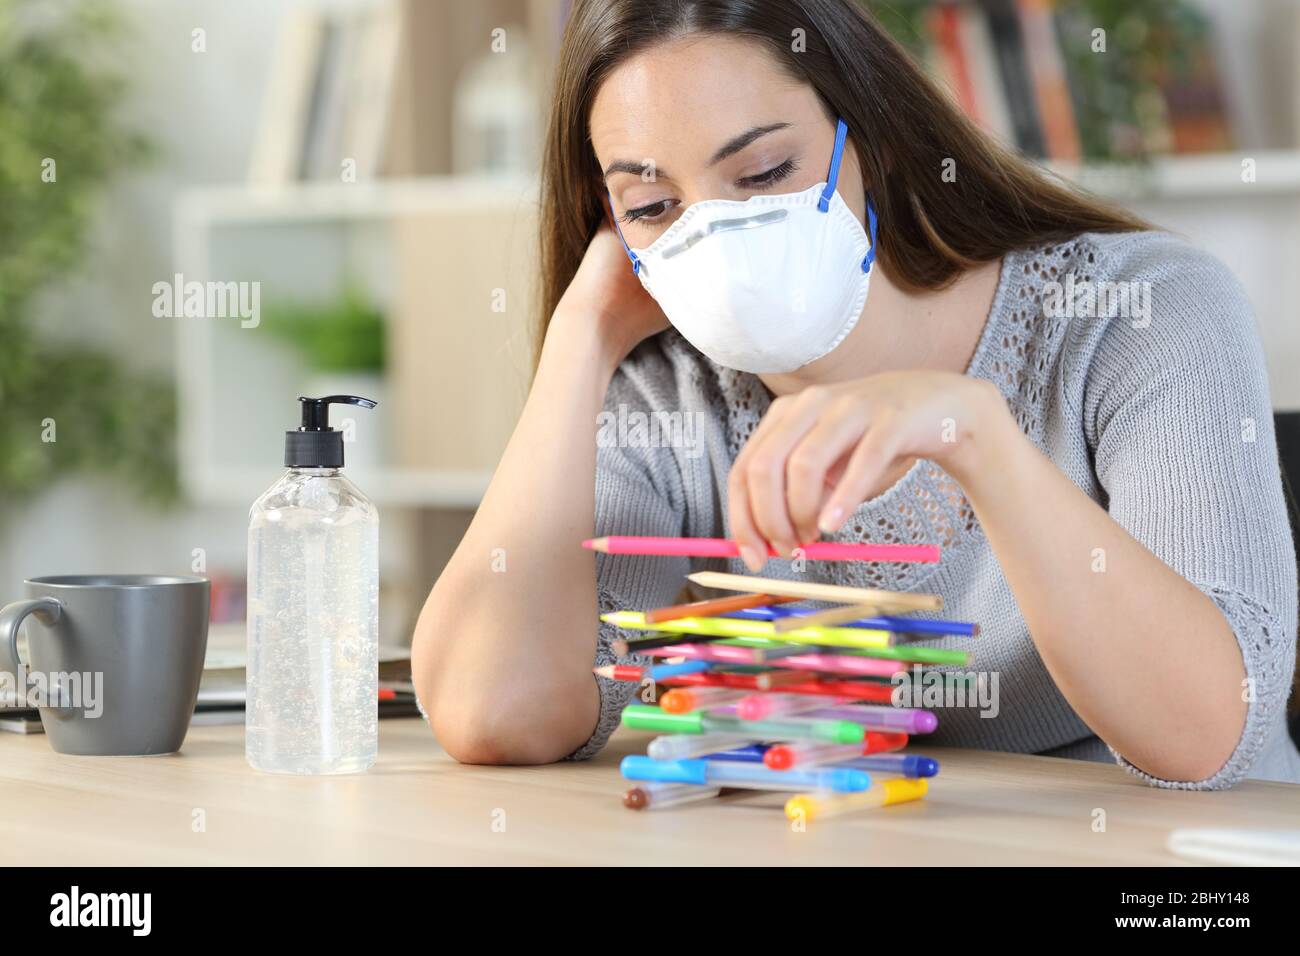 Bored lazy woman with protective mask in quarantine confinement due coronavirus wasting time playing with pencils at home Stock Photo